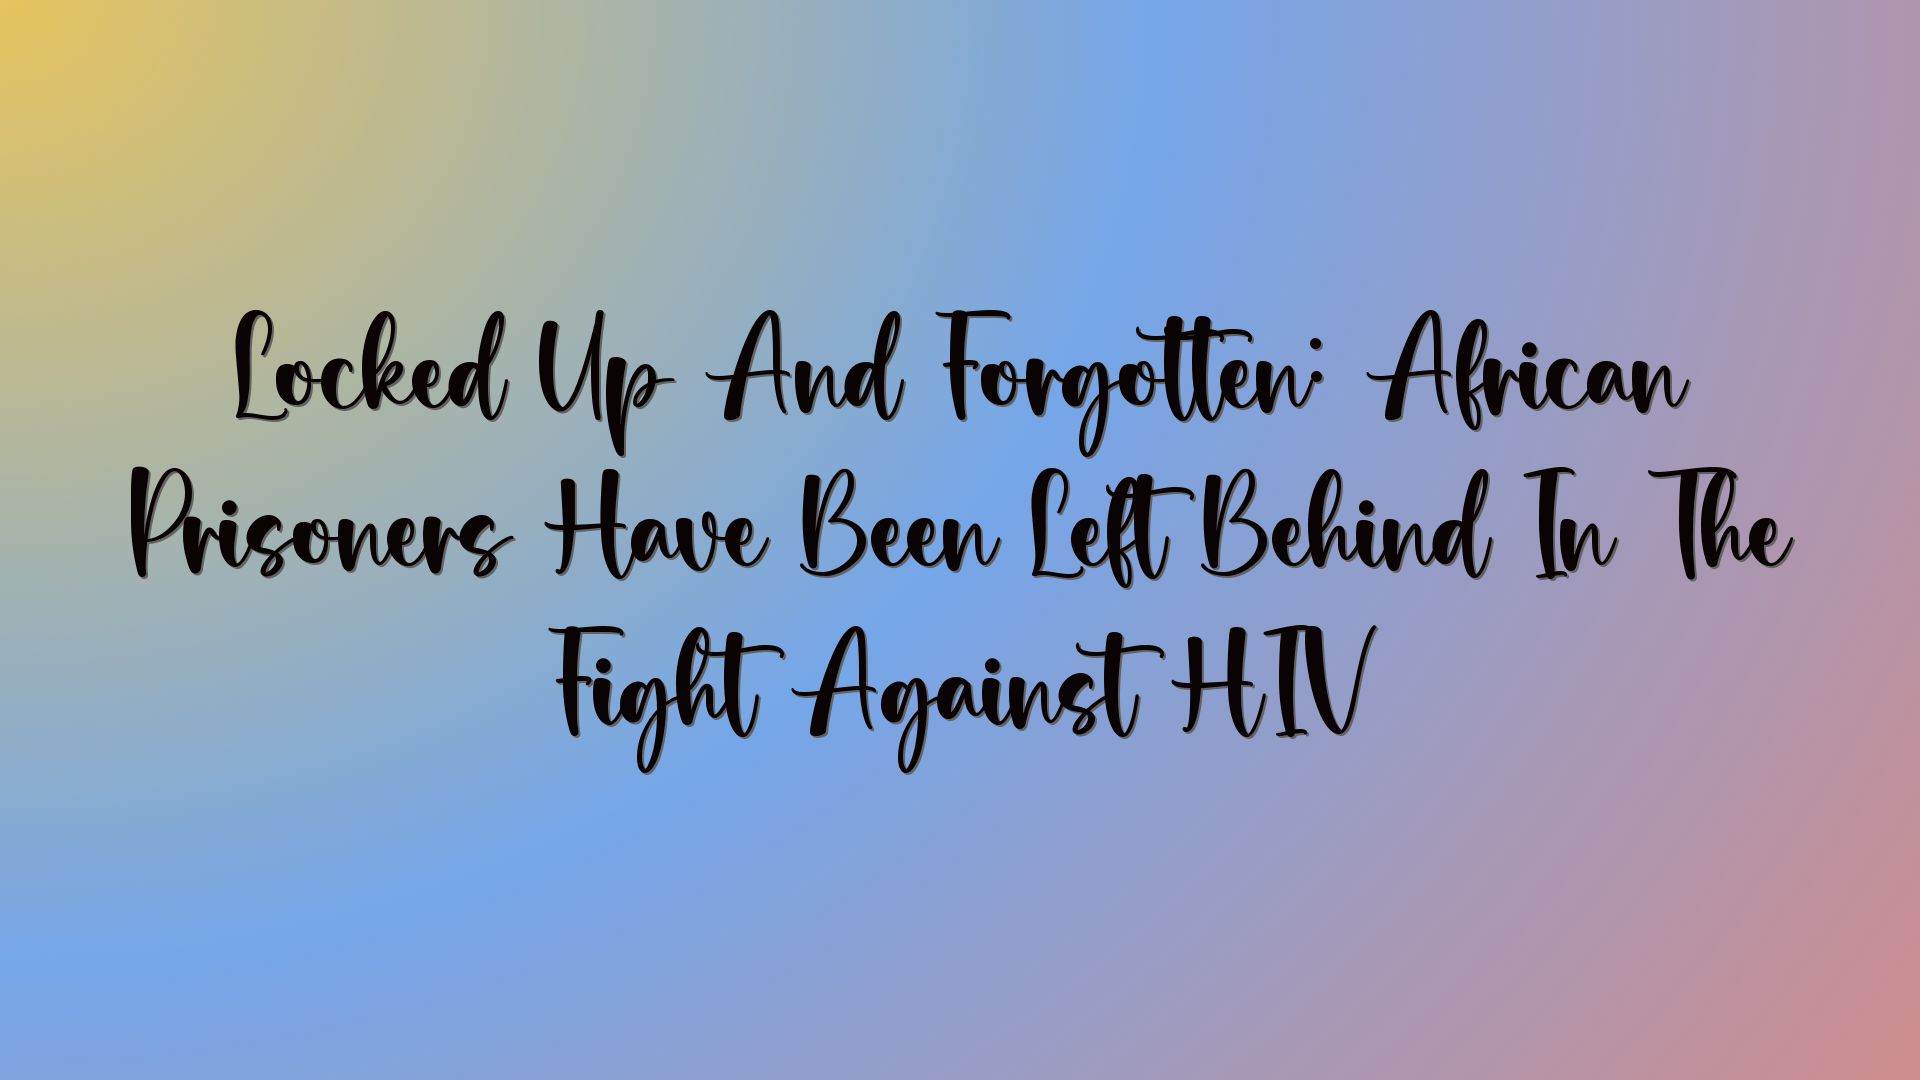 Locked Up And Forgotten: African Prisoners Have Been Left Behind In The Fight Against HIV